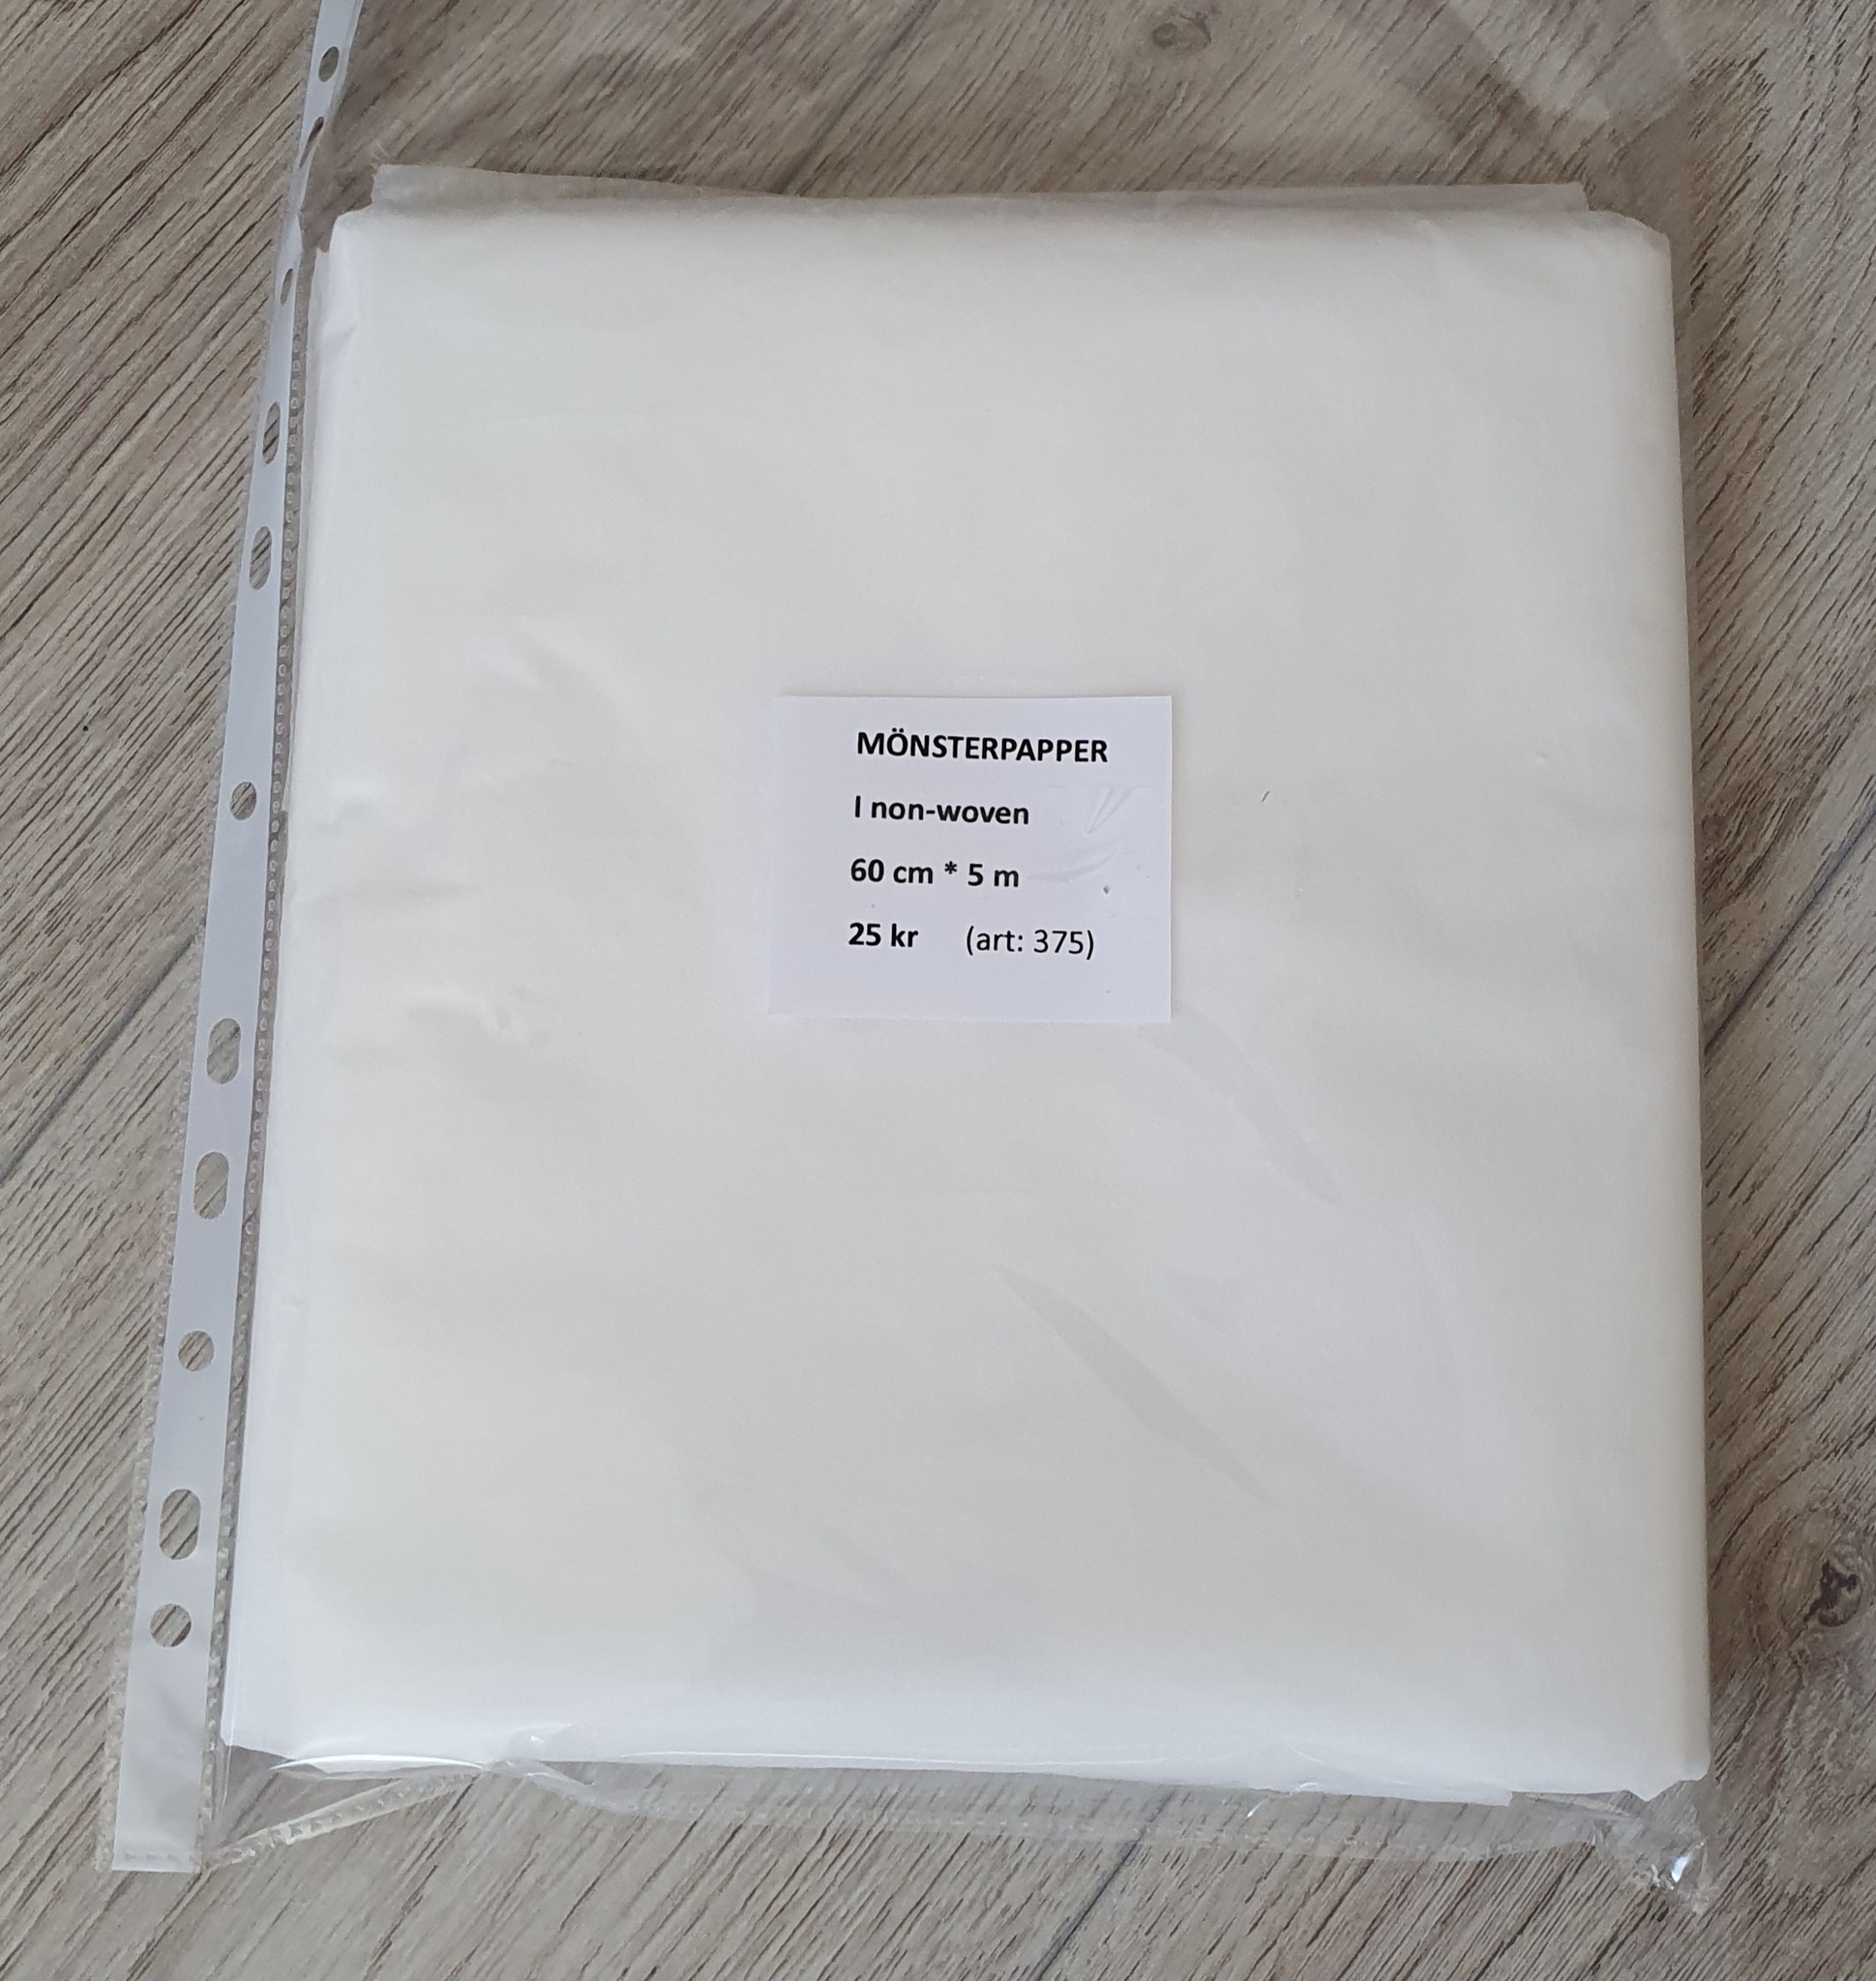 Mönsterpapper i non-woven